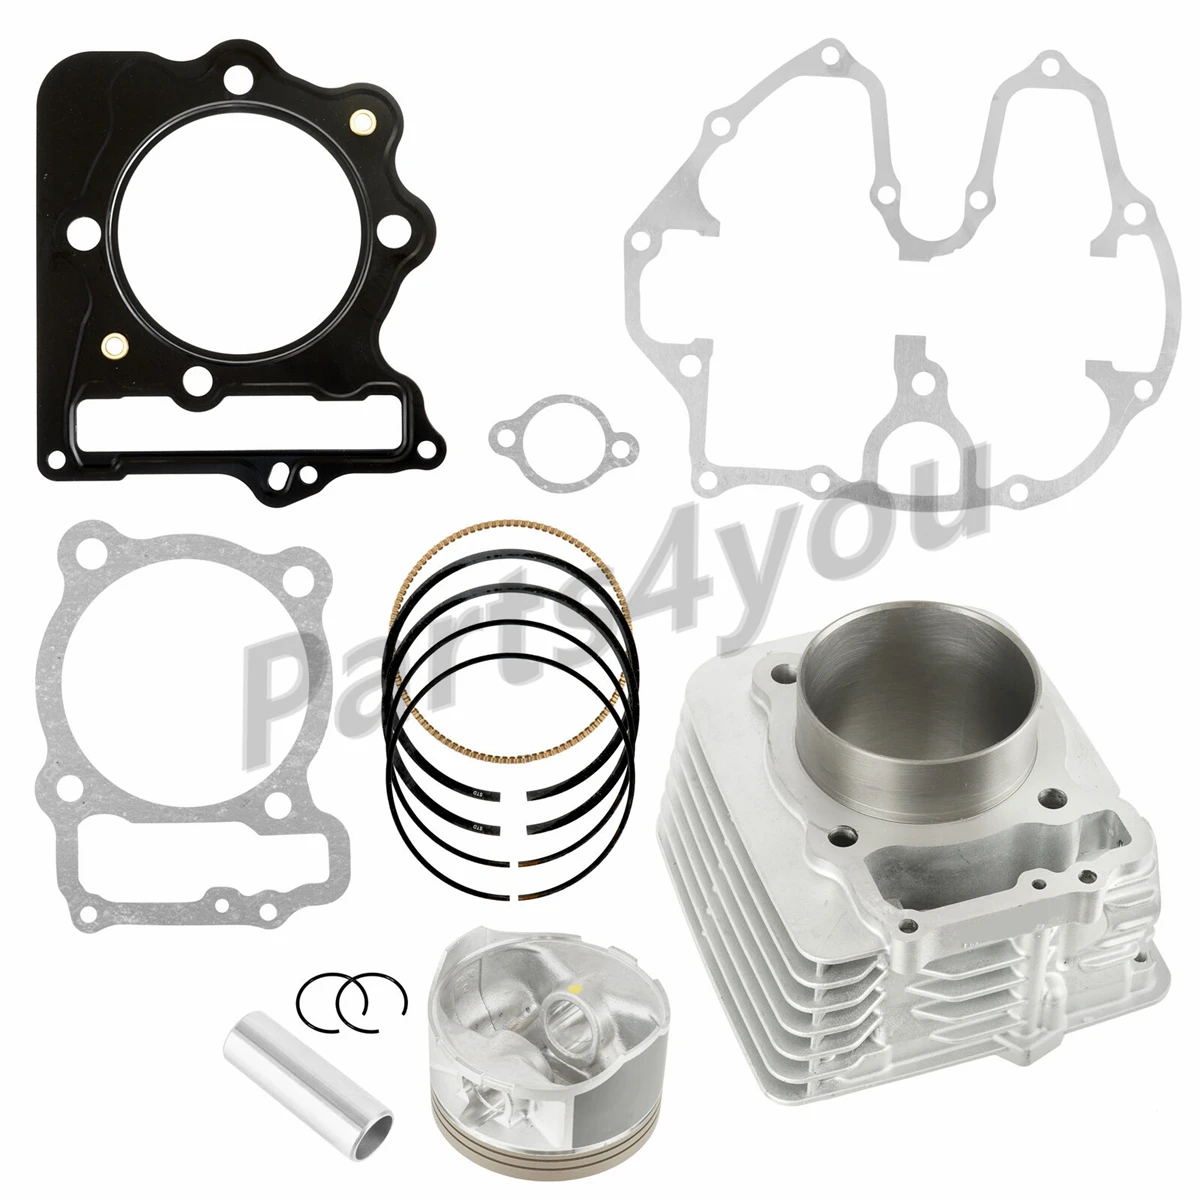 85MM Cylinder Piston Ring Gasket Top End Kit 1999-2007 For Honda Sportrax 400 TRX400EX 400EX 12100-KCY-670, 12191-KCY-672